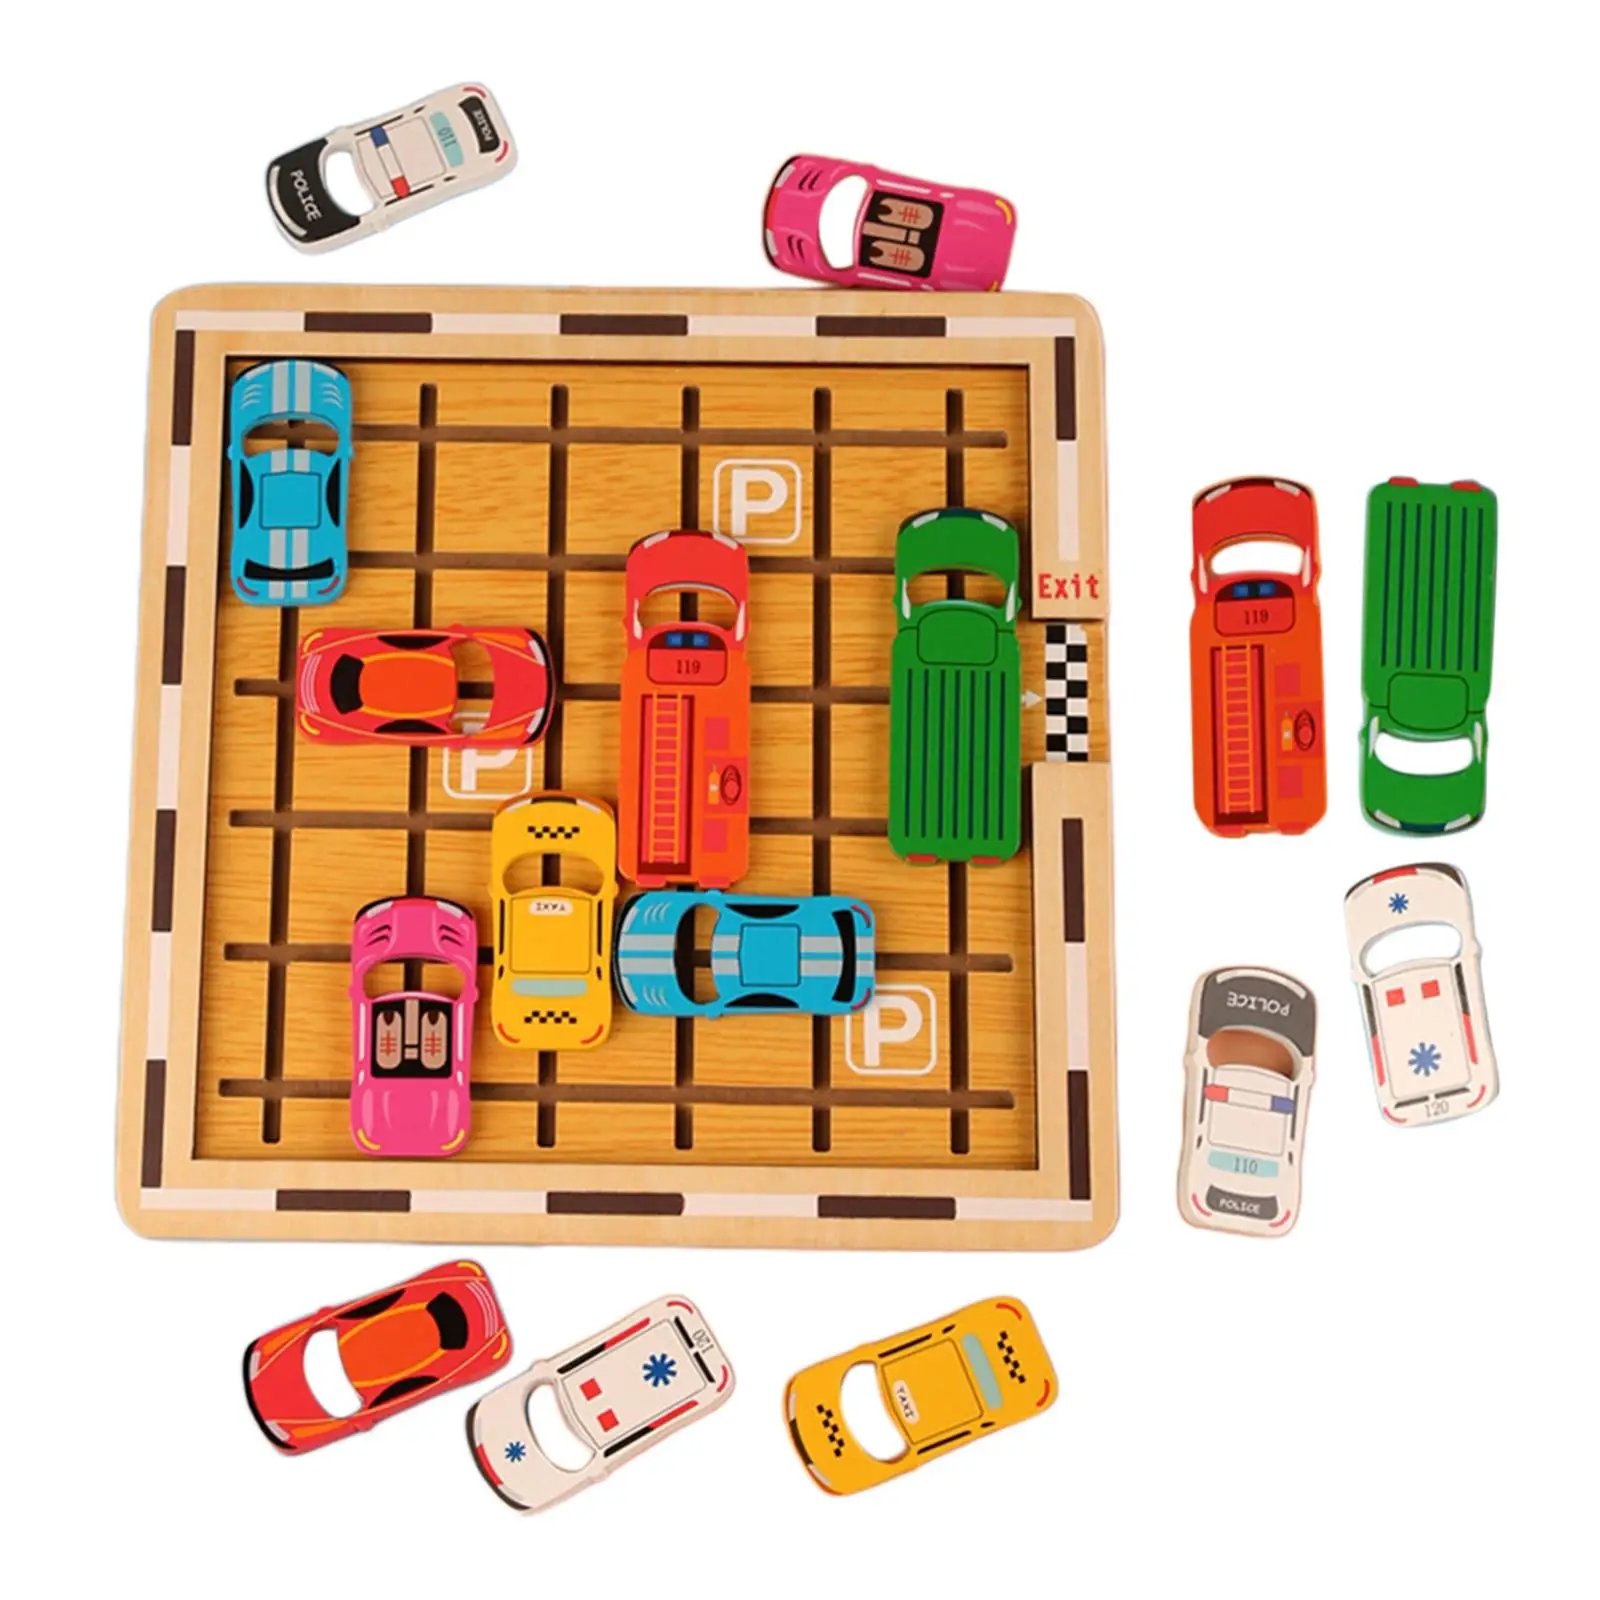 Early Education Car Sensory Toy Exercise Brain Ability Logical Thinking Training for Gifts